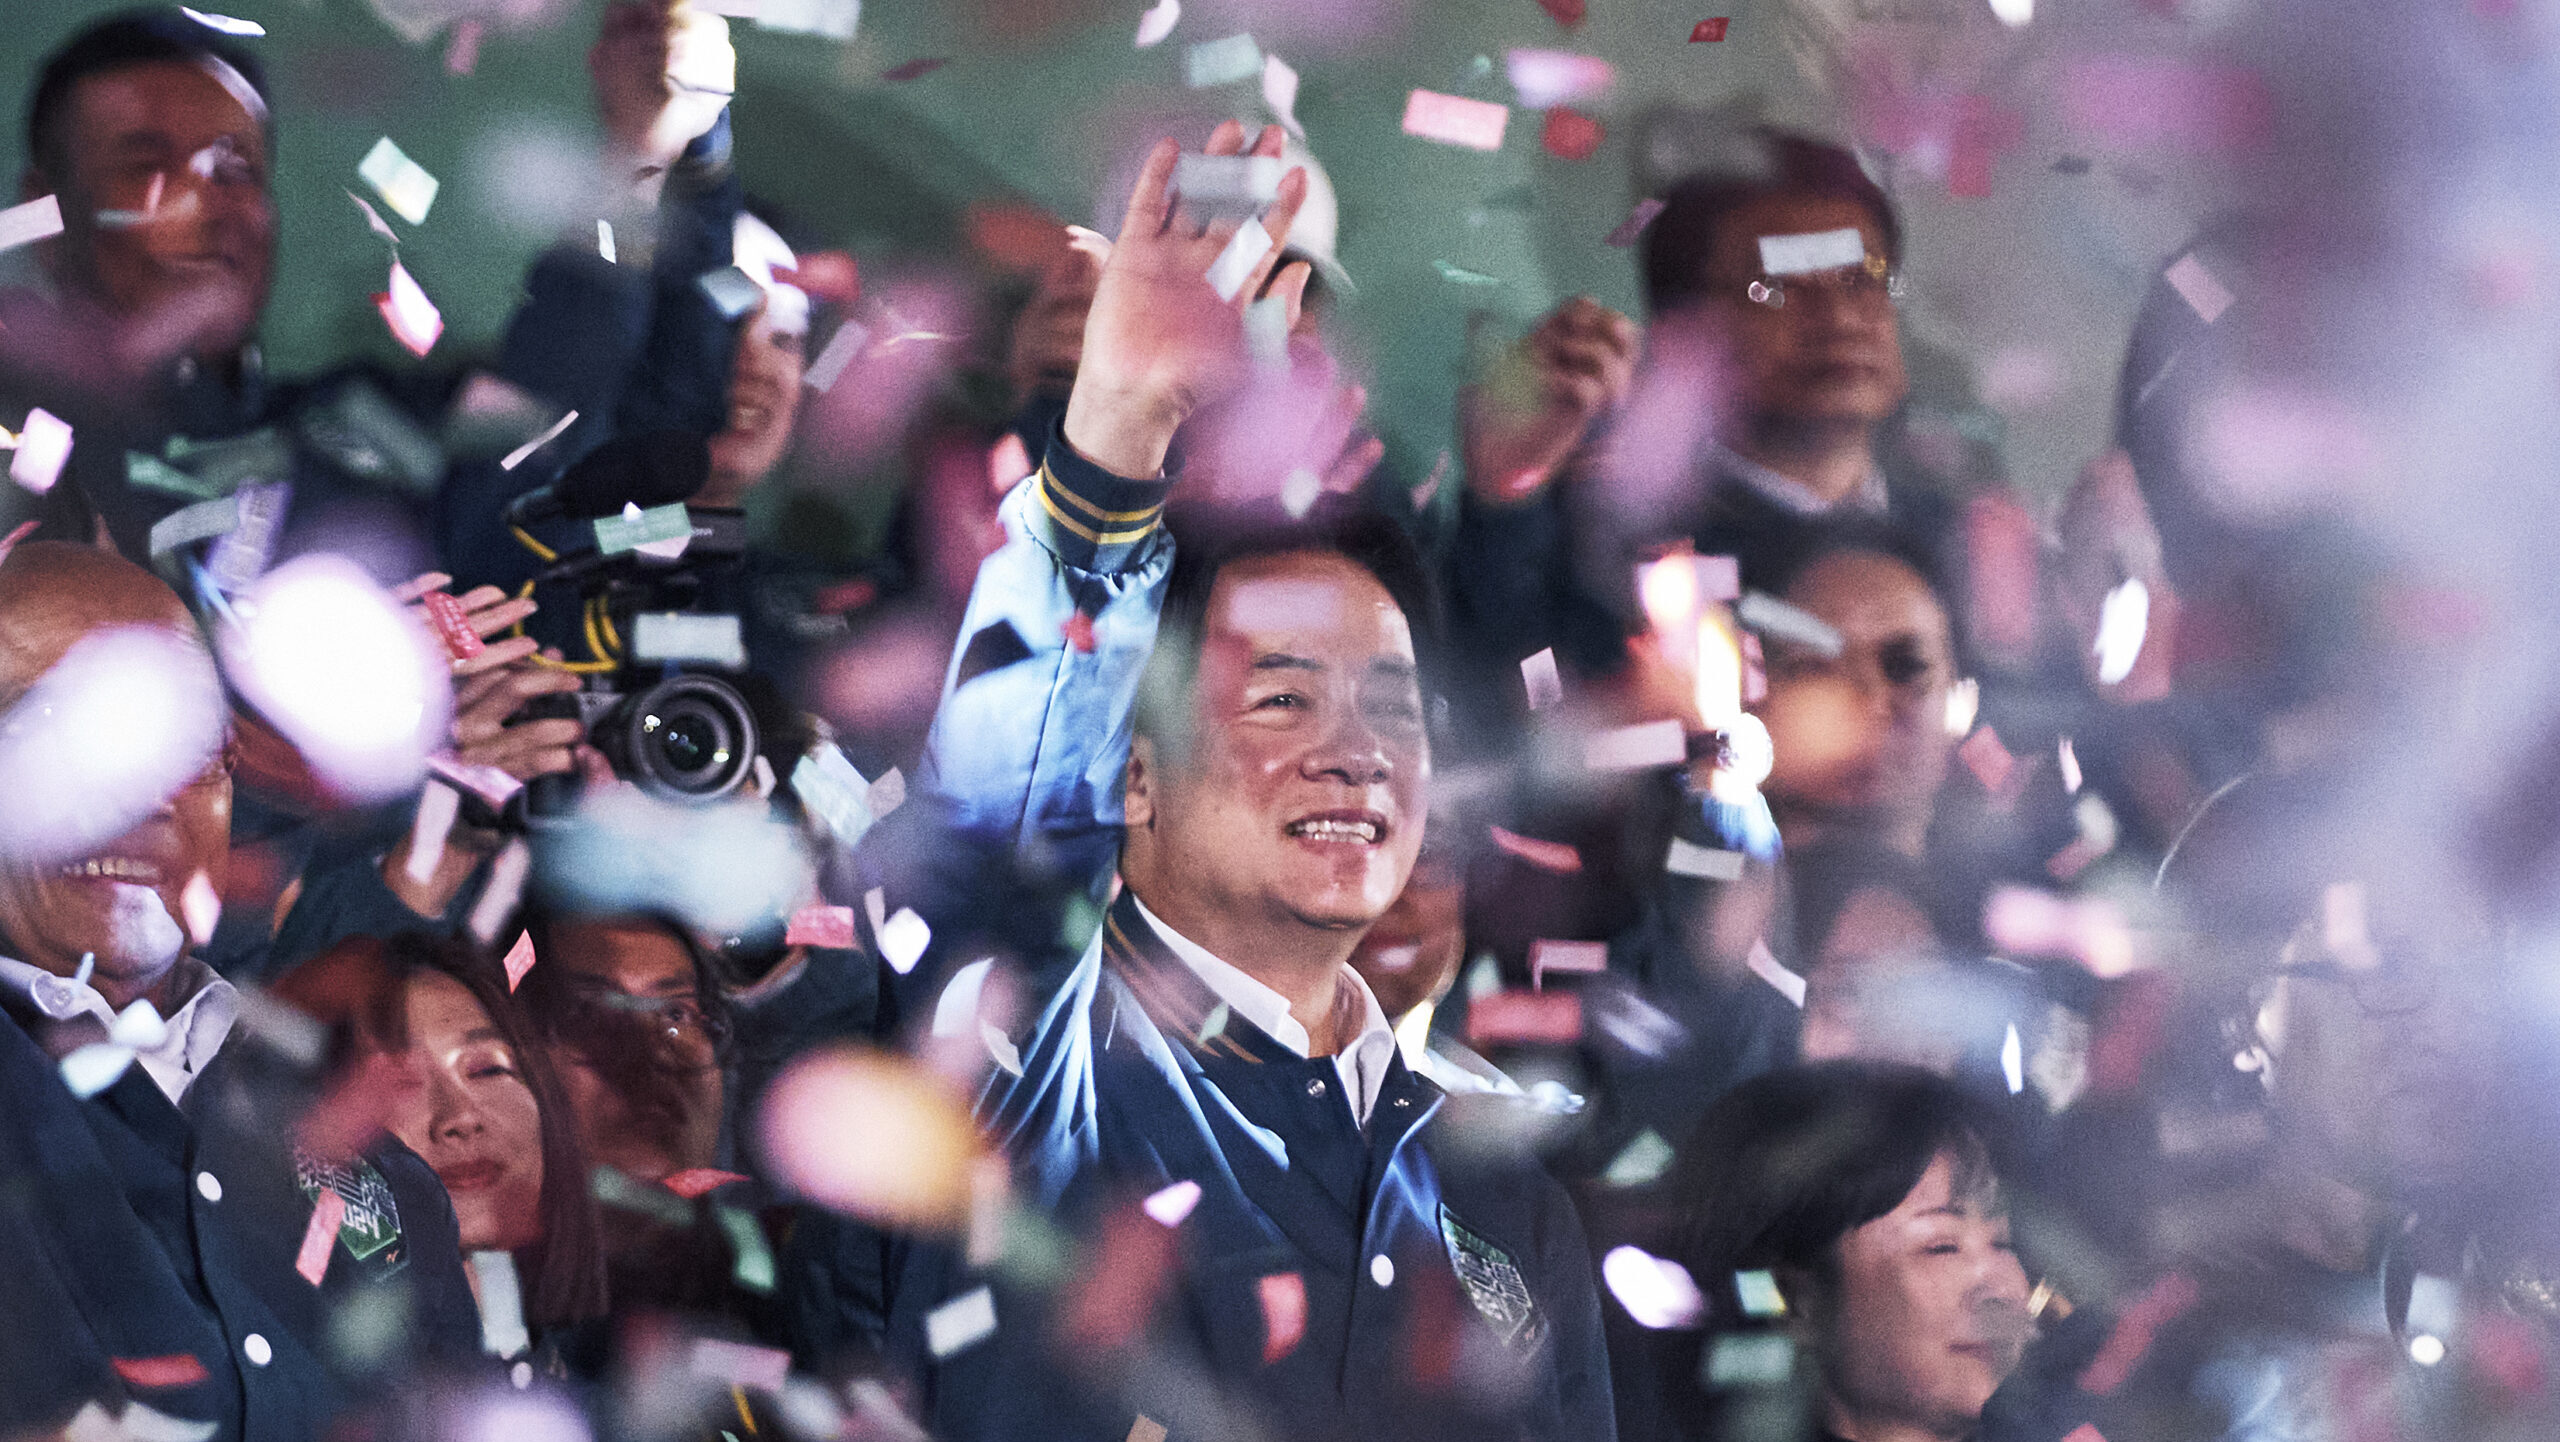 Batten the hatches: Rough times ahead after Taiwan elections